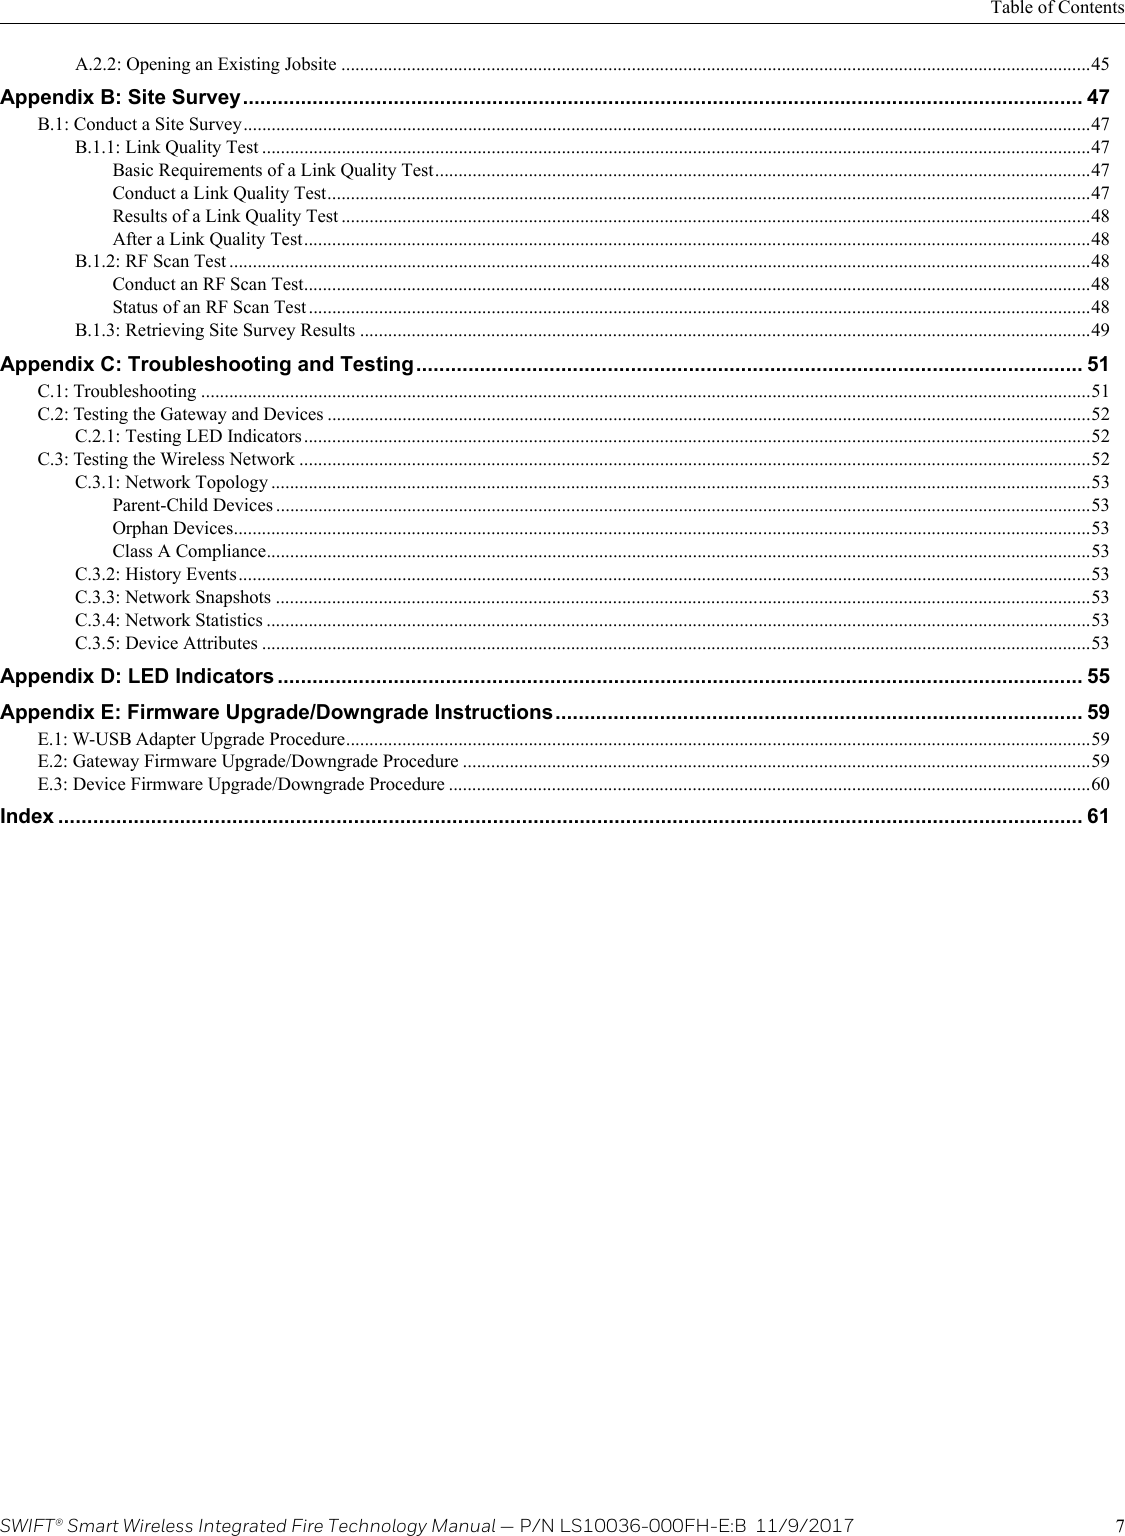 SWIFT® Smart Wireless Integrated Fire Technology Manual — P/N LS10036-000FH-E:B  11/9/2017 7Table of ContentsA.2.2: Opening an Existing Jobsite ................................................................................................................................................................45Appendix B: Site Survey................................................................................................................................................. 47B.1: Conduct a Site Survey.....................................................................................................................................................................................47B.1.1: Link Quality Test .................................................................................................................................................................................47Basic Requirements of a Link Quality Test............................................................................................................................................47Conduct a Link Quality Test...................................................................................................................................................................47Results of a Link Quality Test ................................................................................................................................................................48After a Link Quality Test........................................................................................................................................................................48B.1.2: RF Scan Test ........................................................................................................................................................................................48Conduct an RF Scan Test........................................................................................................................................................................48Status of an RF Scan Test .......................................................................................................................................................................48B.1.3: Retrieving Site Survey Results ............................................................................................................................................................49Appendix C: Troubleshooting and Testing................................................................................................................... 51C.1: Troubleshooting ..............................................................................................................................................................................................51C.2: Testing the Gateway and Devices ...................................................................................................................................................................52C.2.1: Testing LED Indicators ........................................................................................................................................................................52C.3: Testing the Wireless Network .........................................................................................................................................................................52C.3.1: Network Topology ...............................................................................................................................................................................53Parent-Child Devices ..............................................................................................................................................................................53Orphan Devices.......................................................................................................................................................................................53Class A Compliance................................................................................................................................................................................53C.3.2: History Events......................................................................................................................................................................................53C.3.3: Network Snapshots ..............................................................................................................................................................................53C.3.4: Network Statistics ................................................................................................................................................................................53C.3.5: Device Attributes .................................................................................................................................................................................53Appendix D: LED Indicators ........................................................................................................................................... 55Appendix E: Firmware Upgrade/Downgrade Instructions........................................................................................... 59E.1: W-USB Adapter Upgrade Procedure...............................................................................................................................................................59E.2: Gateway Firmware Upgrade/Downgrade Procedure ......................................................................................................................................59E.3: Device Firmware Upgrade/Downgrade Procedure .........................................................................................................................................60Index ................................................................................................................................................................................. 61